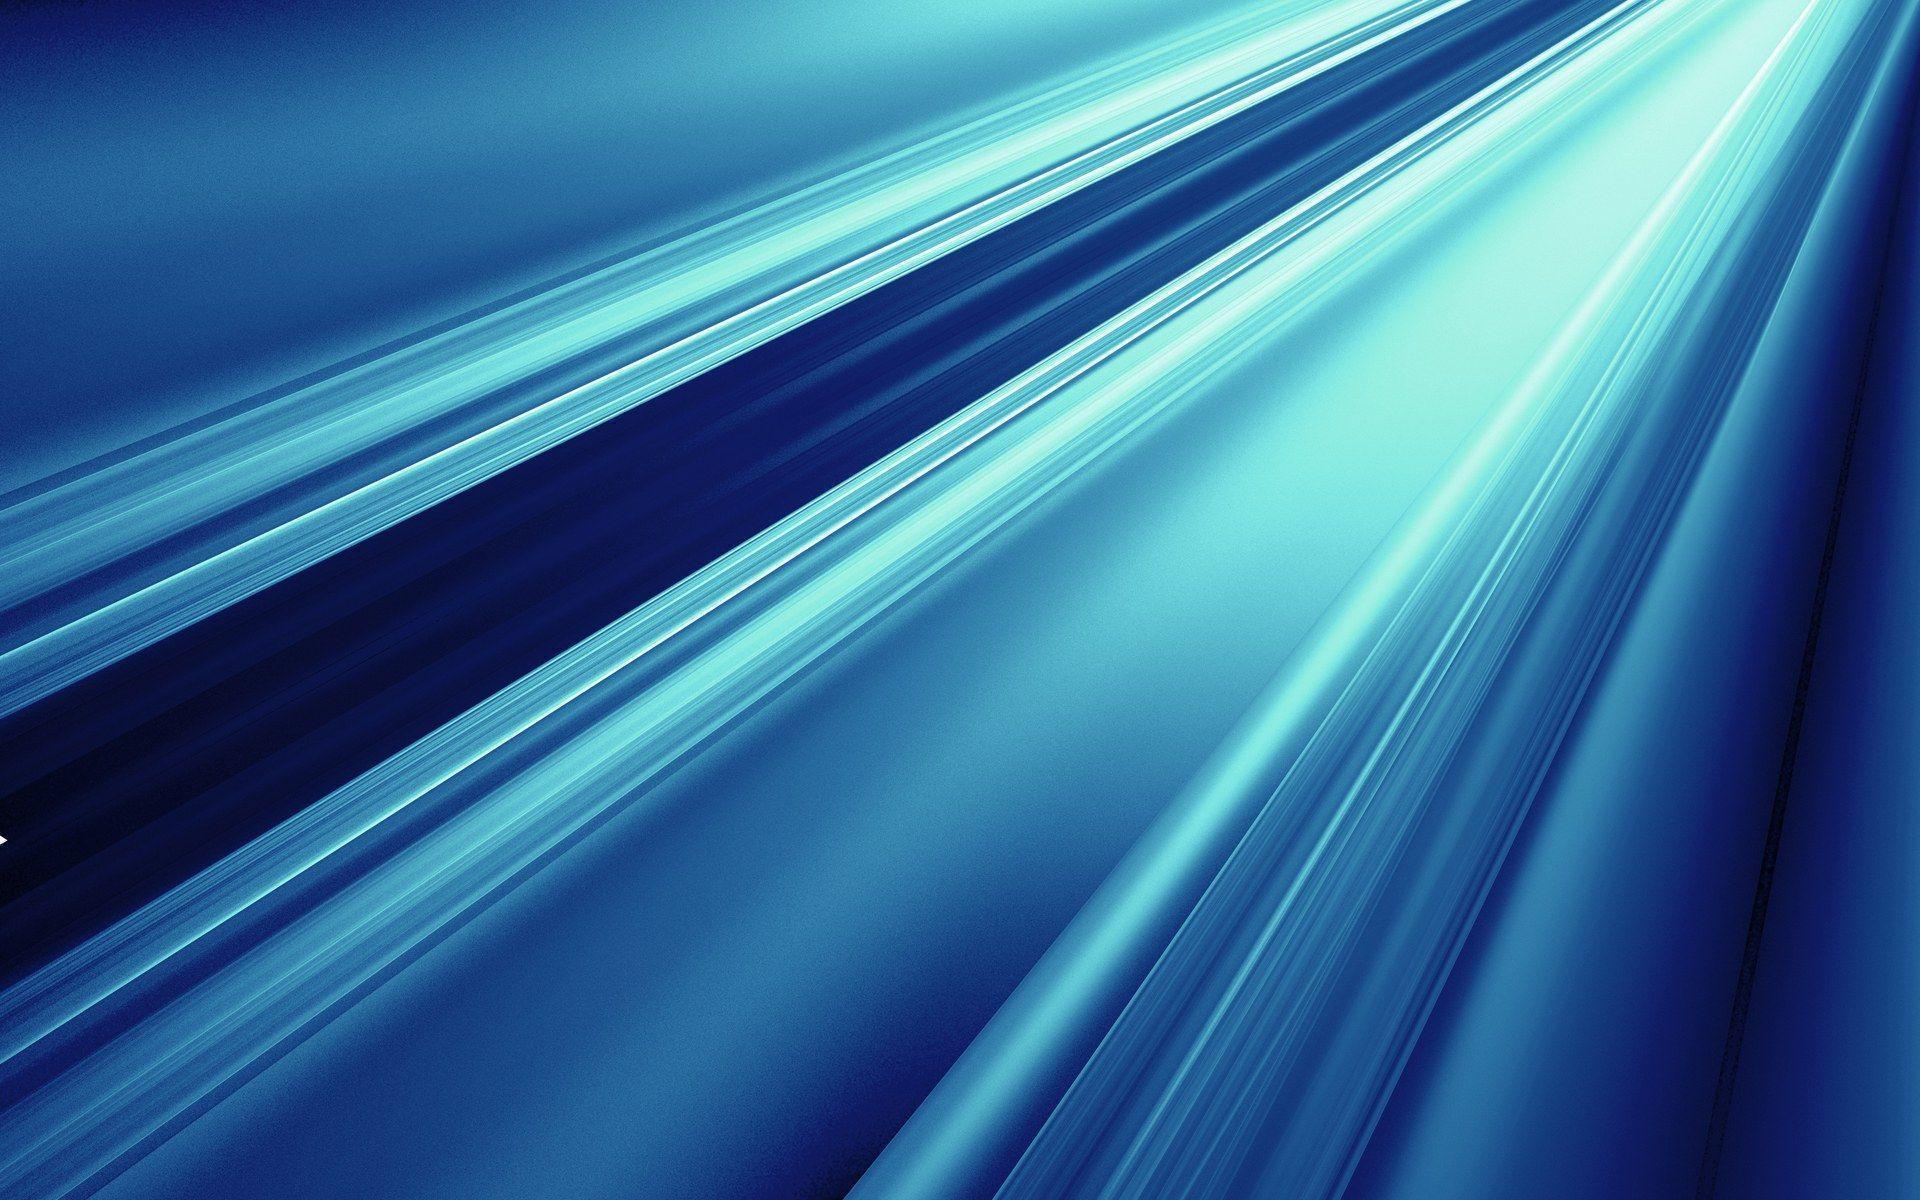 Abstract Blue Background Wallpaper 1920x1200PX Wallpaper